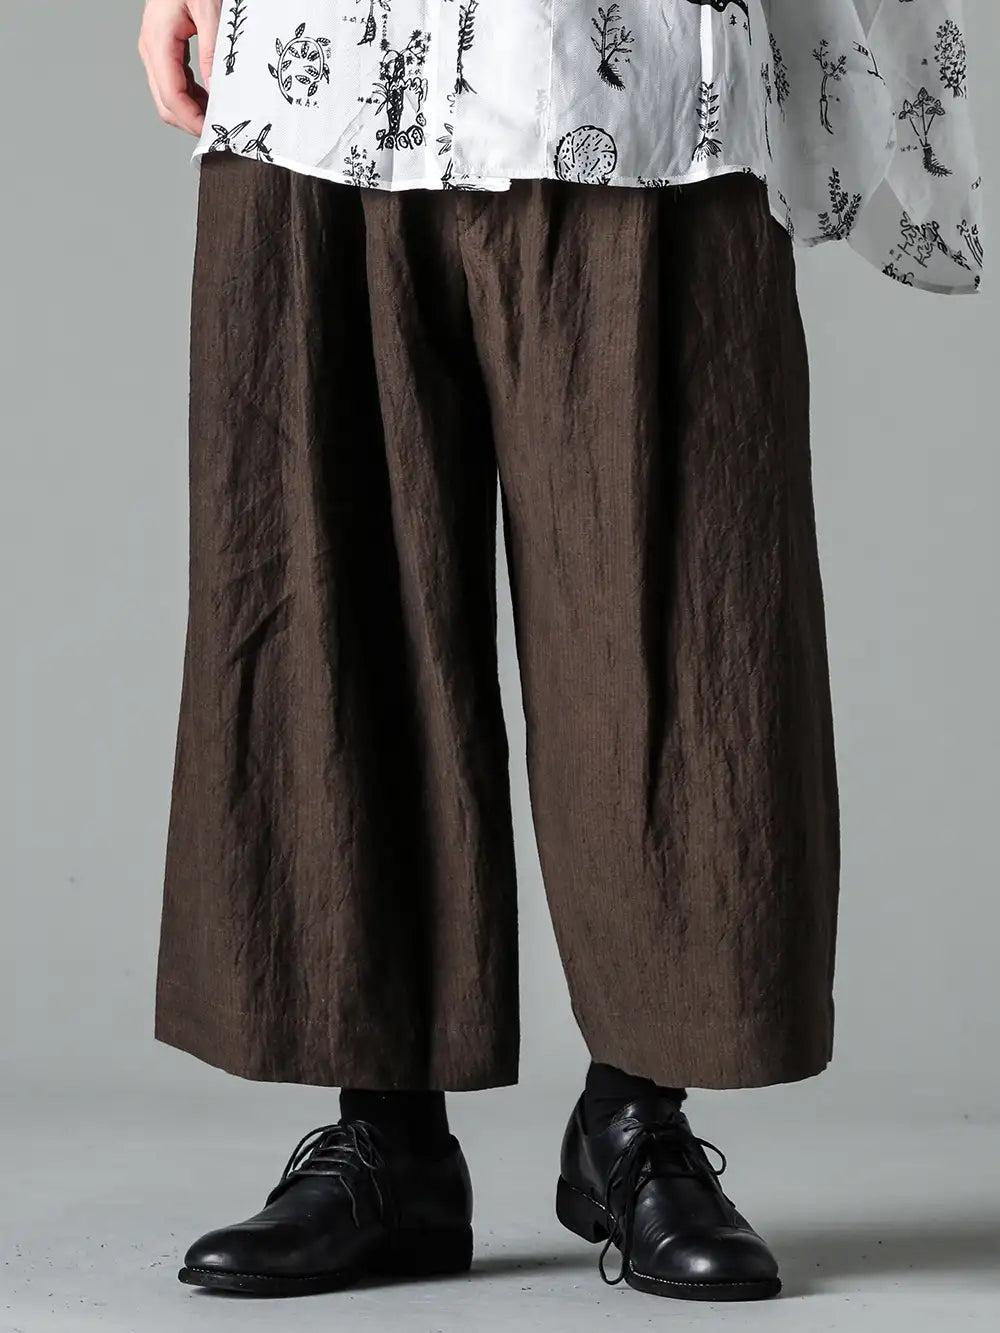 ZIGGY CHEN 24SS - Comfortable, casual fashion in a fashionable way - 0M2410509 Pleated Extra Wide Leg Trousers - 992x-black-guidi Classic Derby Shoes Laced Up Single Sole - Horse Full Grain - 992X Black 3-001